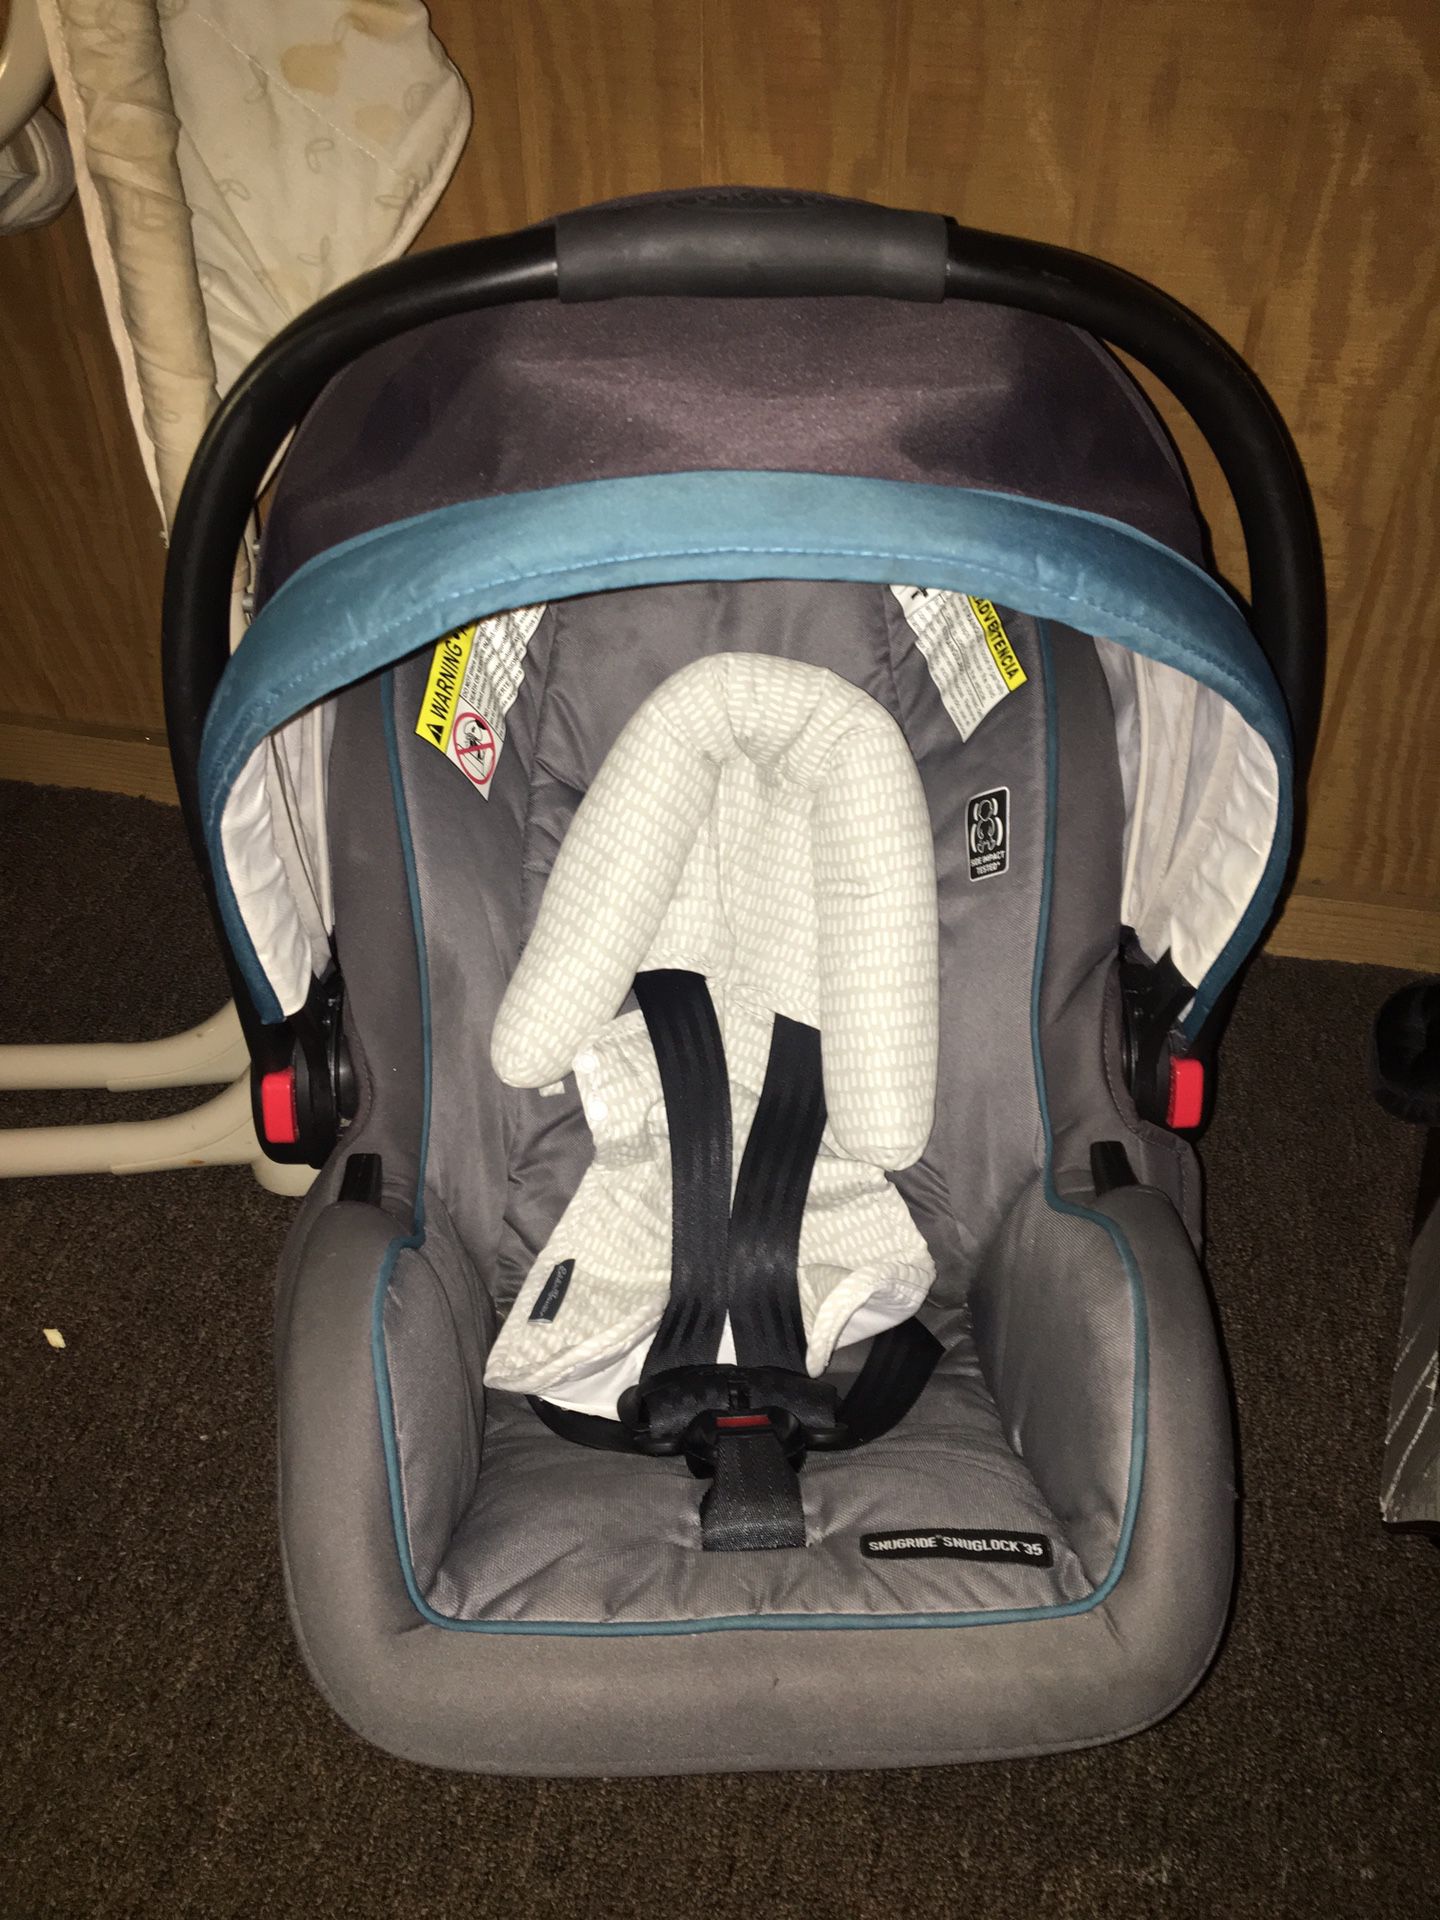 Graco snug ride car seat and infant head piece